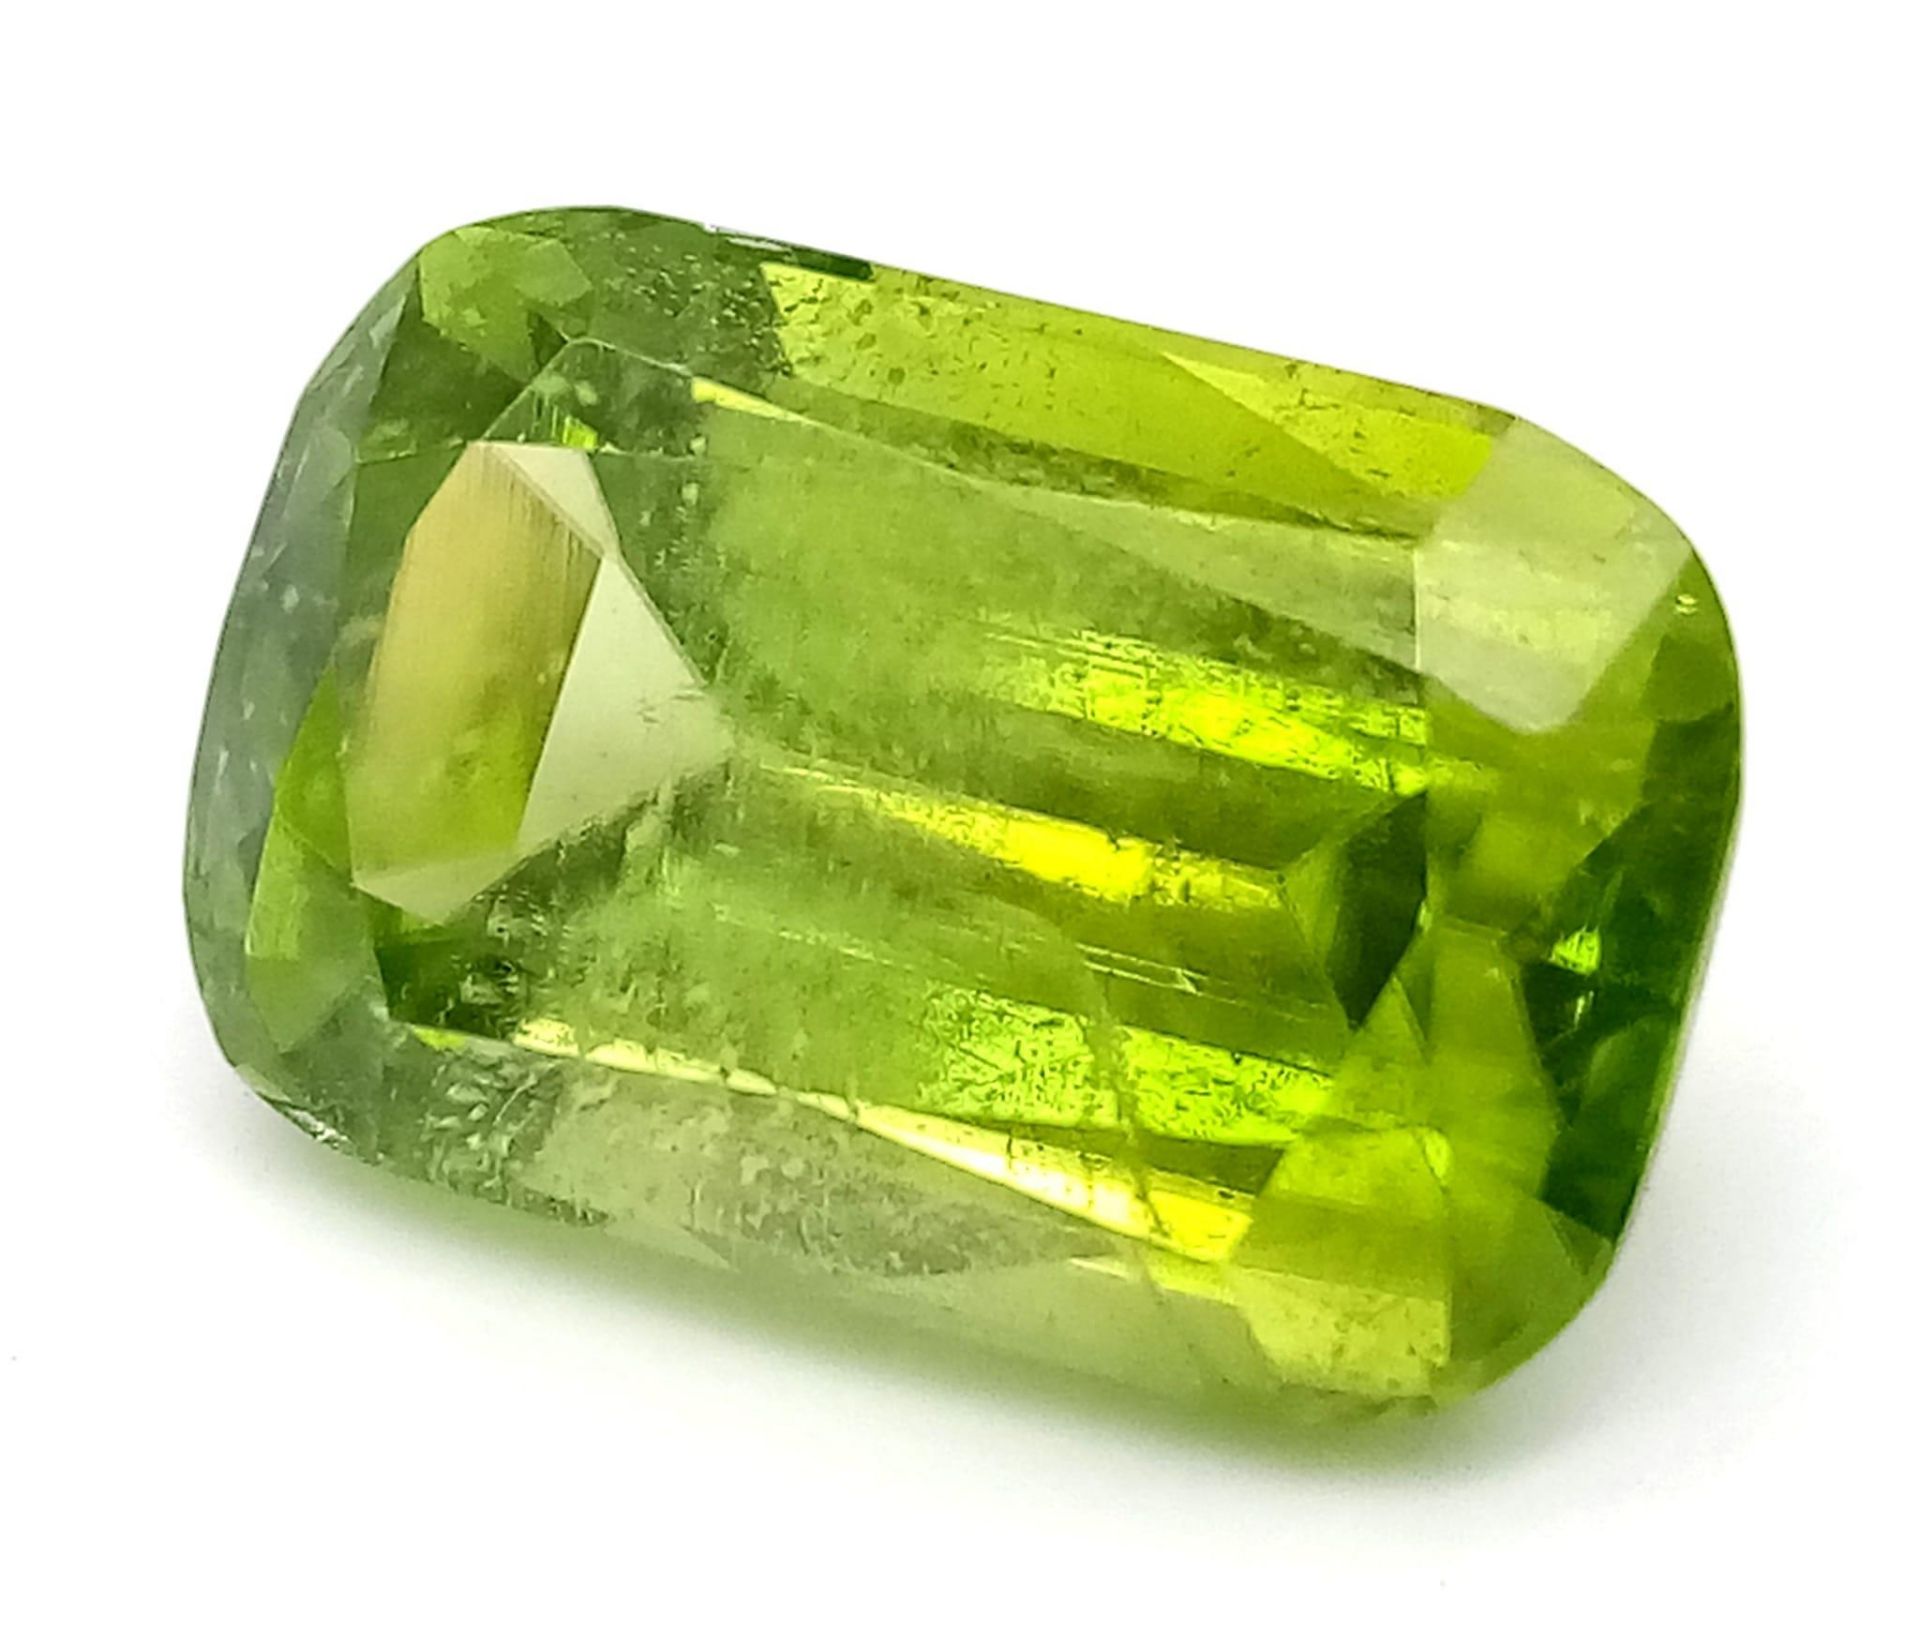 A Rare 9.97ct Pakistani Peridot. Cushion cut with no inclusions. Comes with a GFCO Swiss